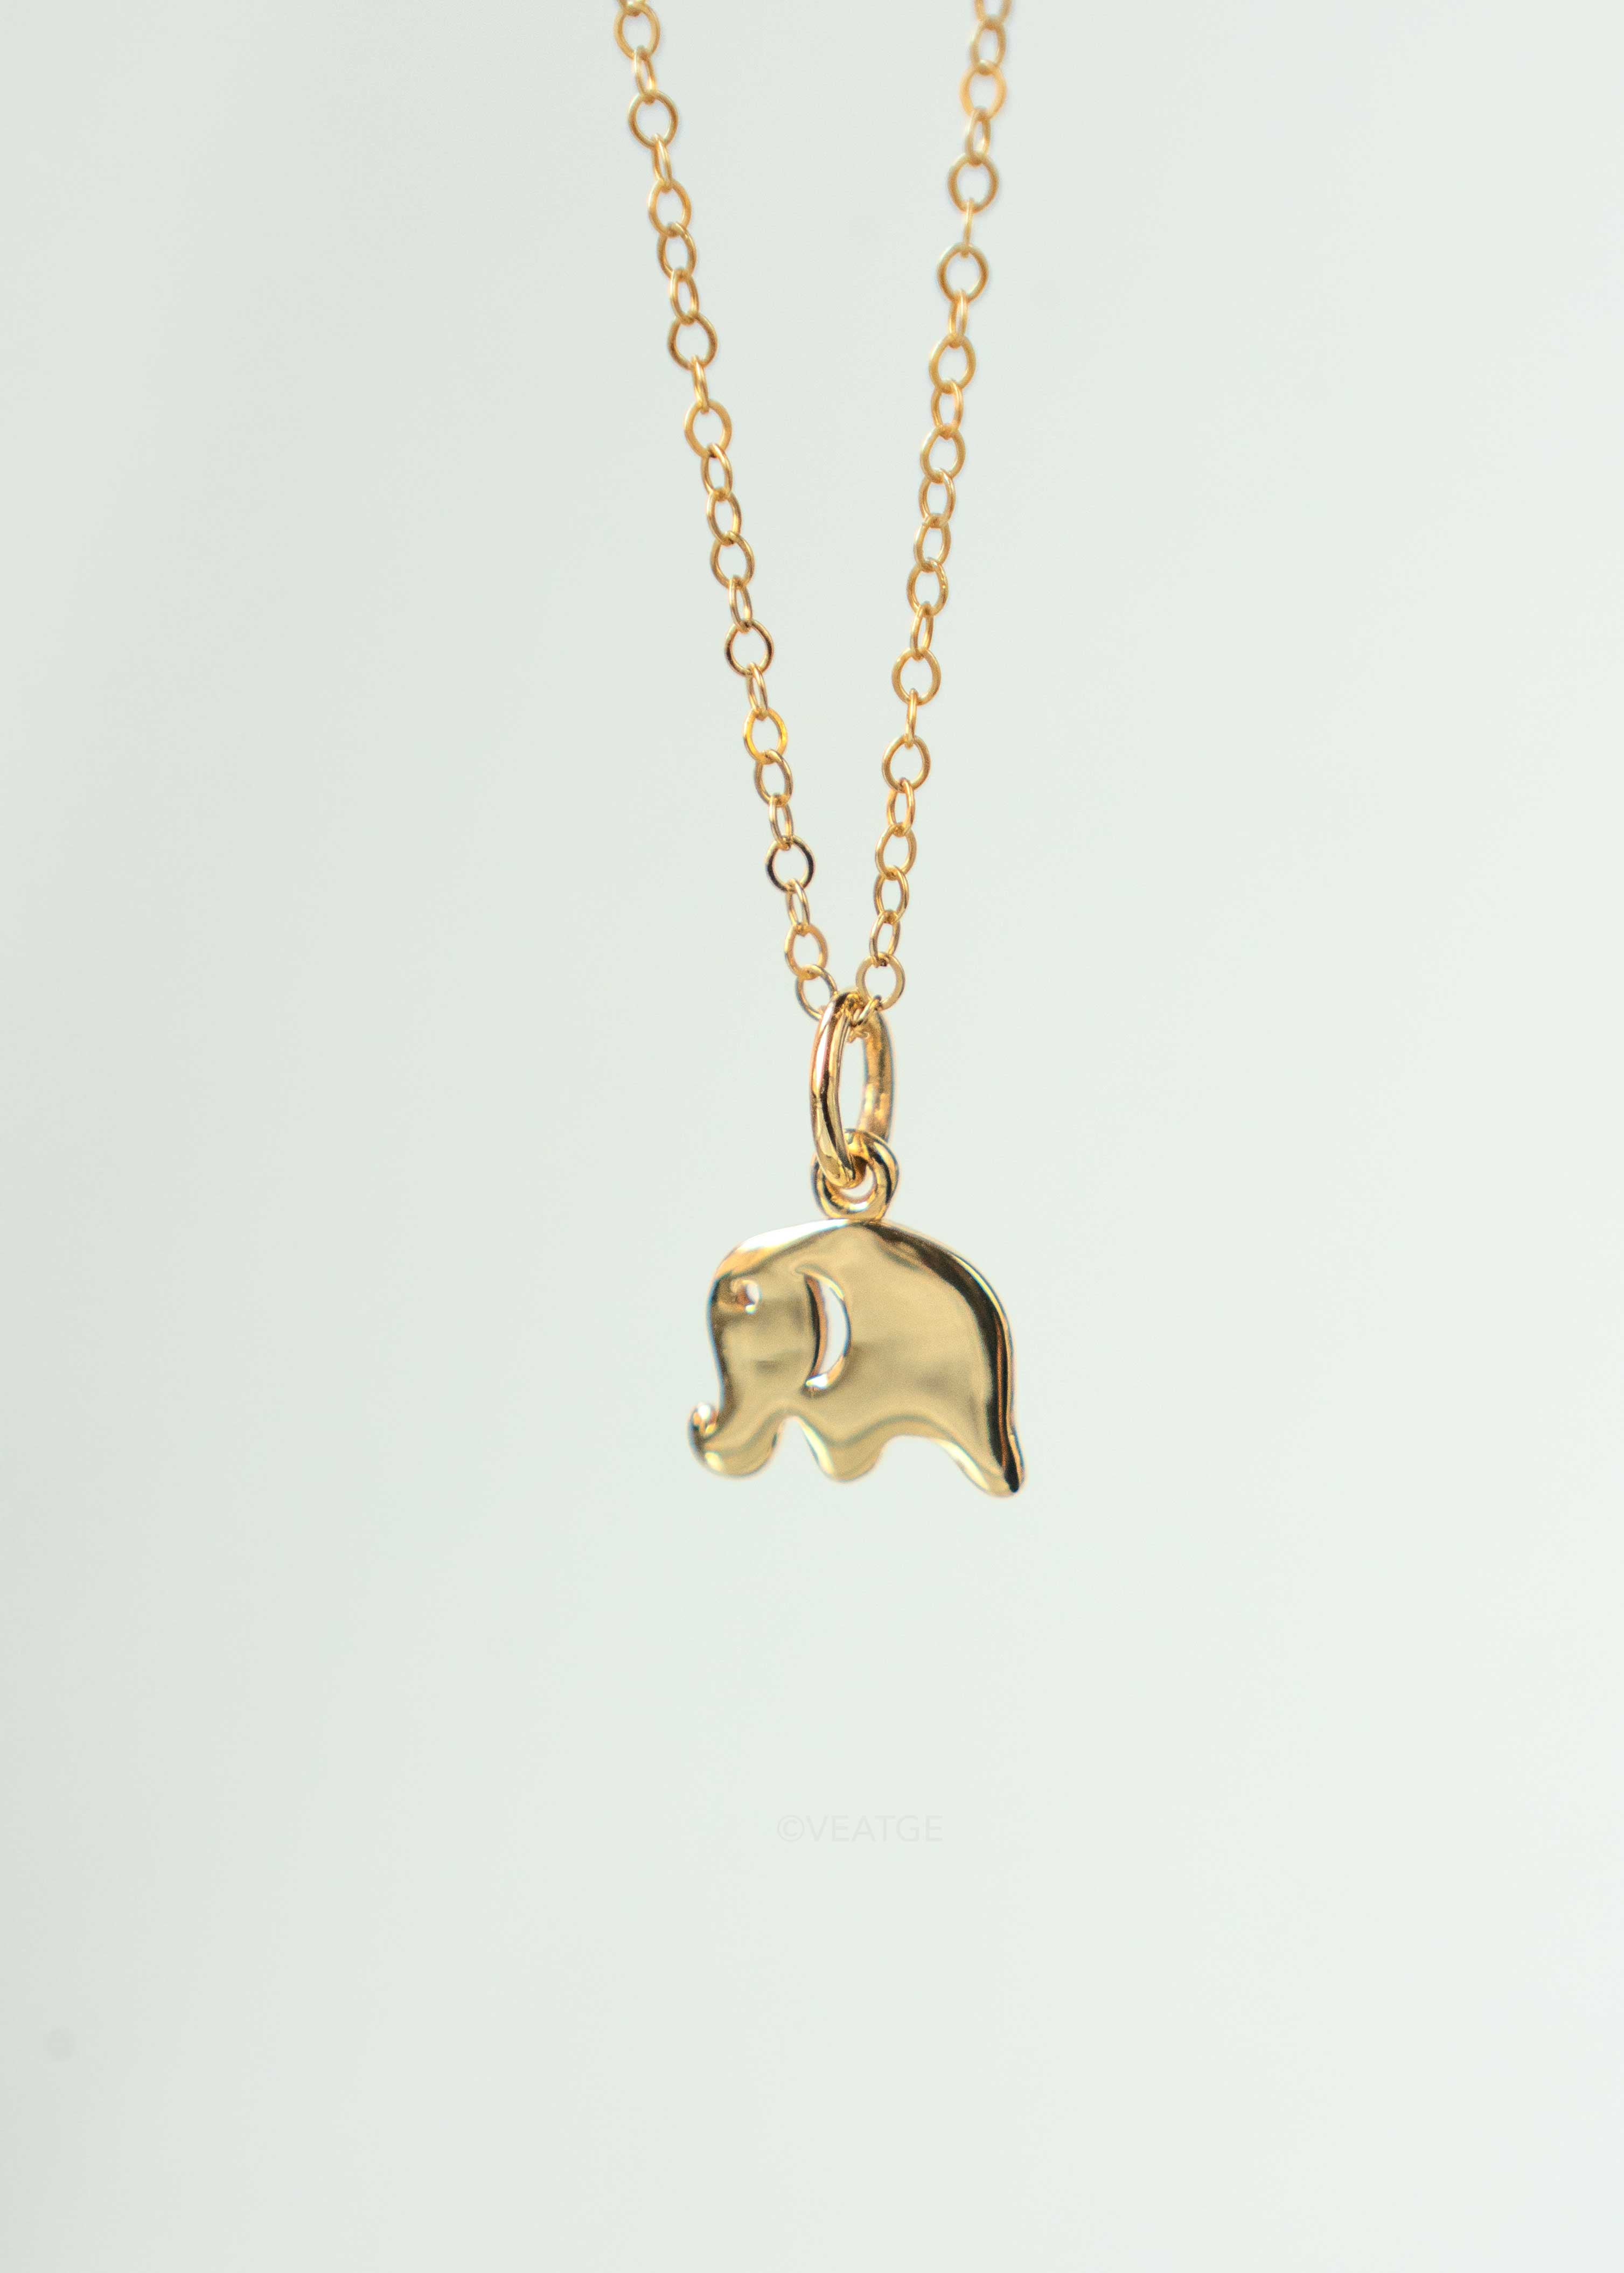 Elephant Charm Pendant Gold Dainty Necklace Cute gifts for girlfriend bff Christmas graduation